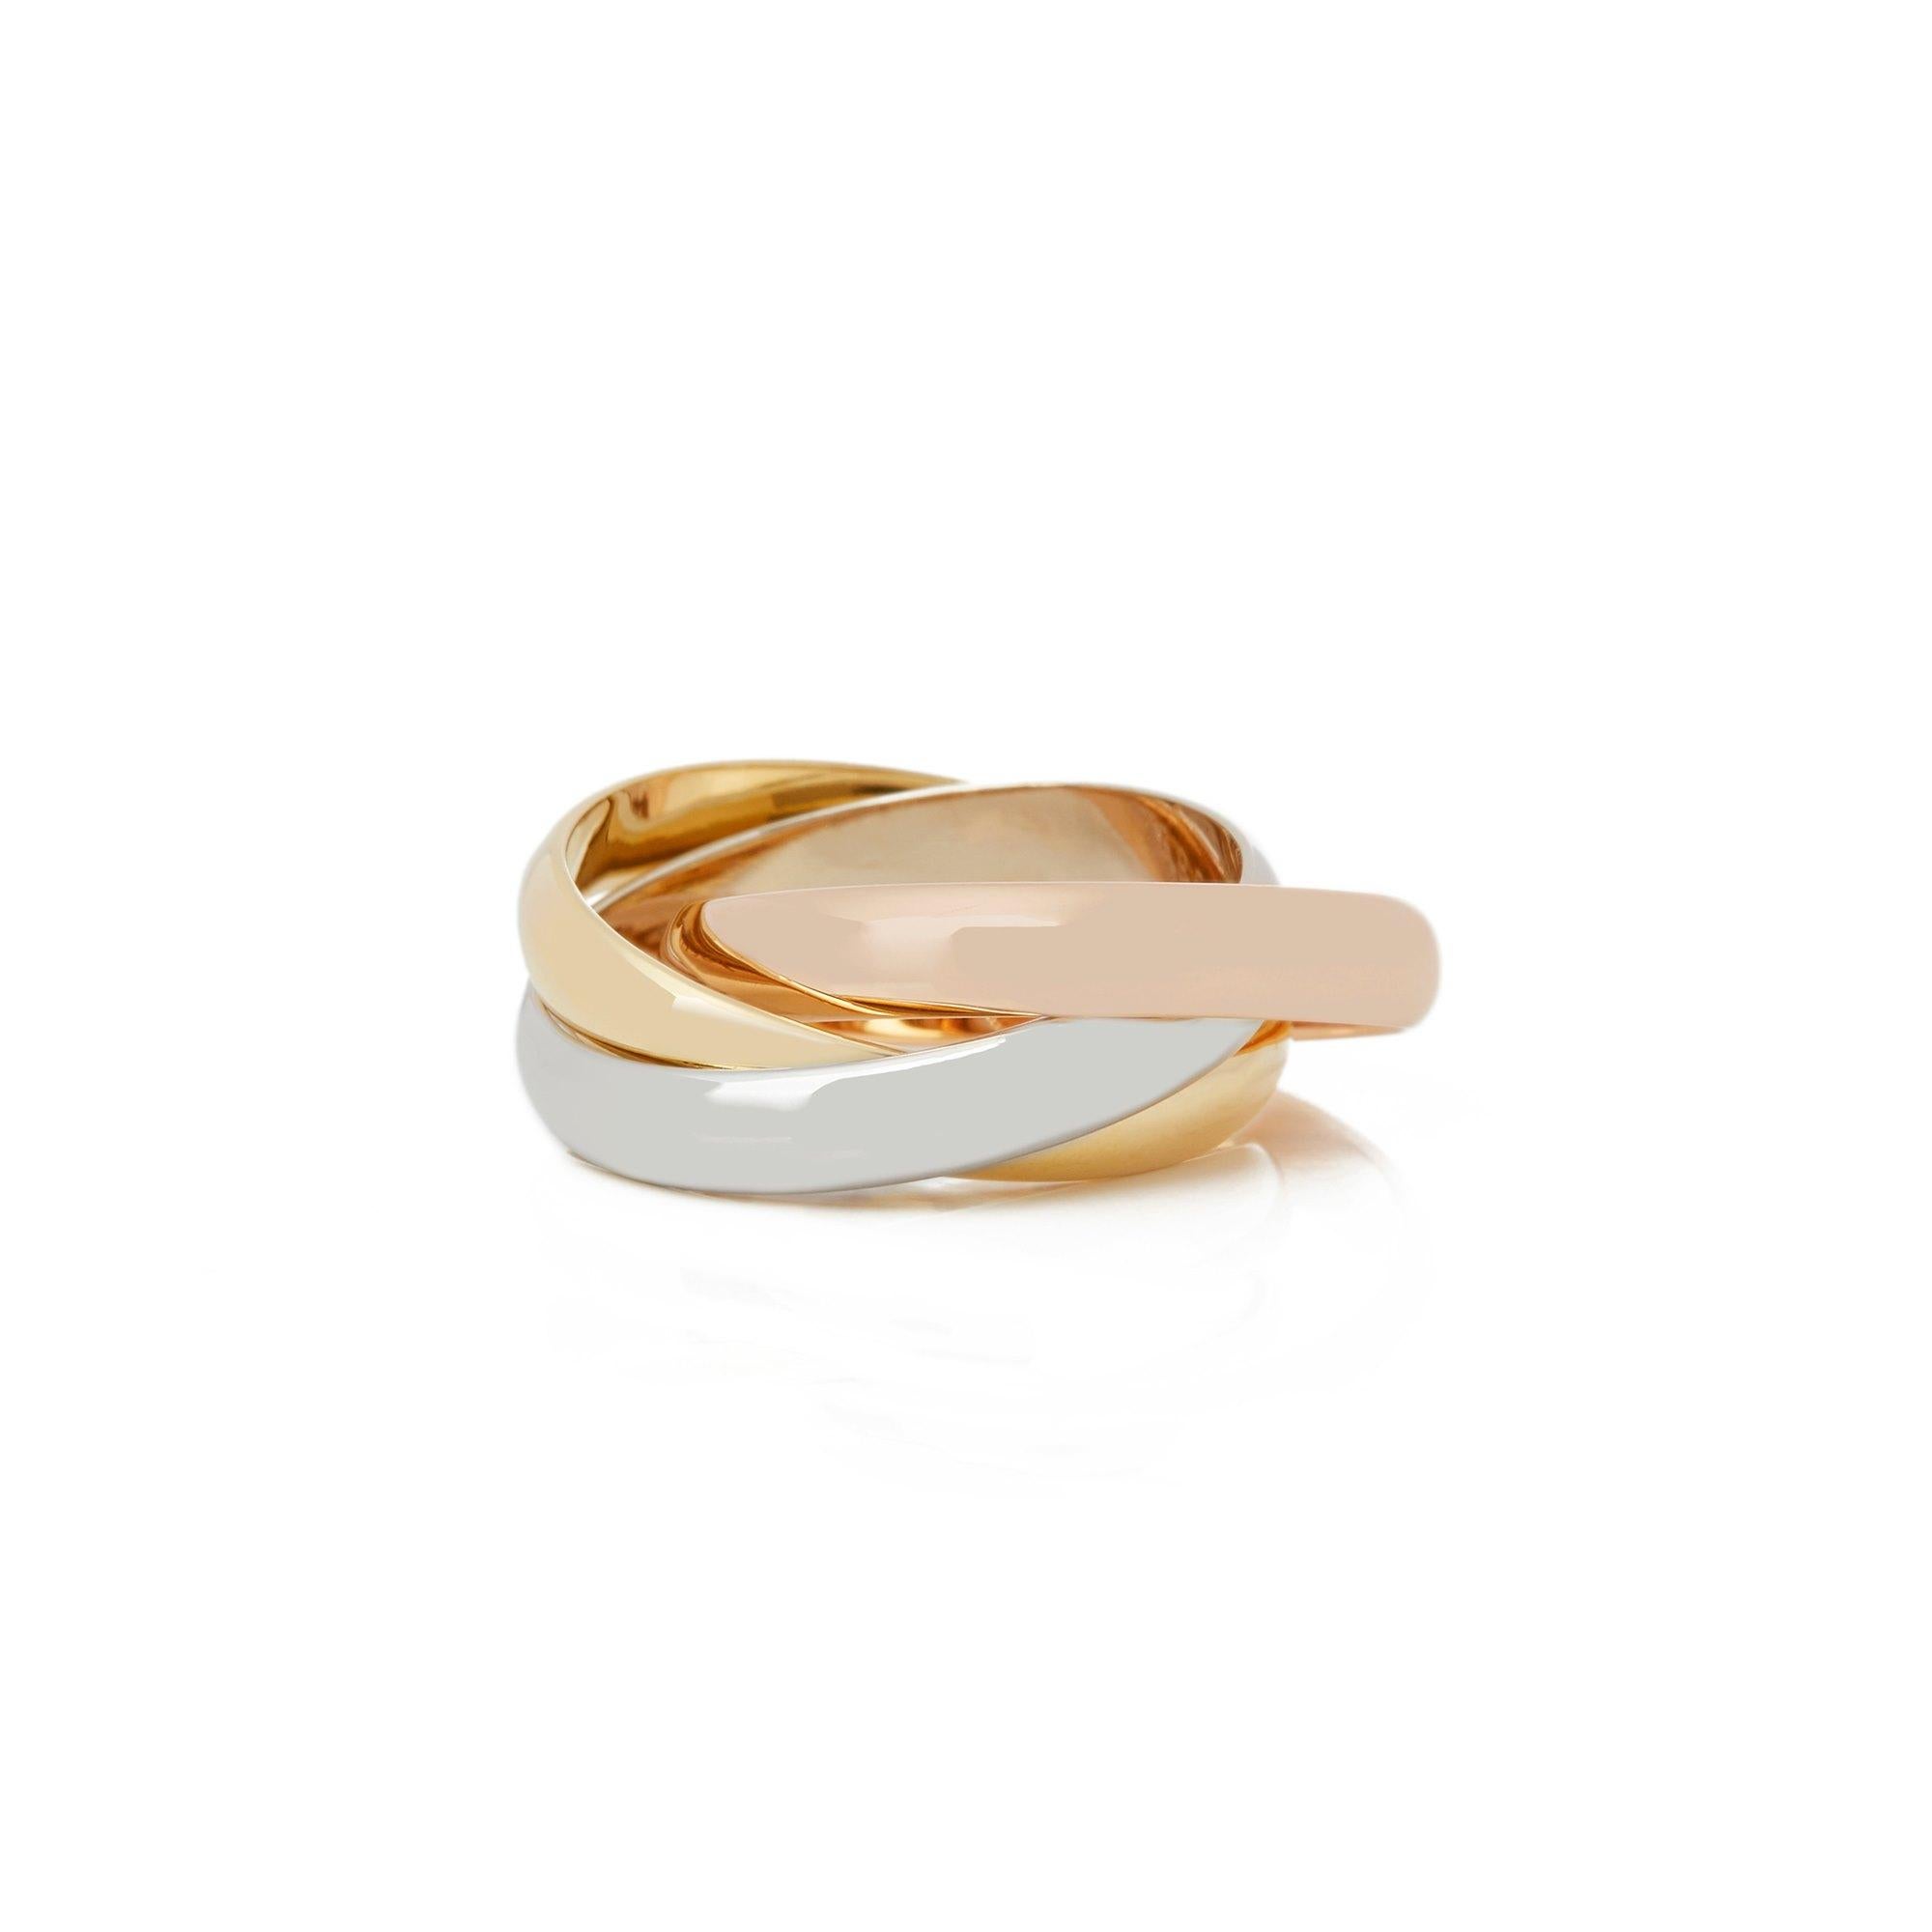 This Ring by Cartier is from their Trinity Collection and features Three Bands in 18k Yellow, White and Rose Gold. Ring Size UK M, EU Size 53, USA Size 6 1/2. Complete with Xupes Presentation Box. Our Xupes reference is COMJ209 should you need to